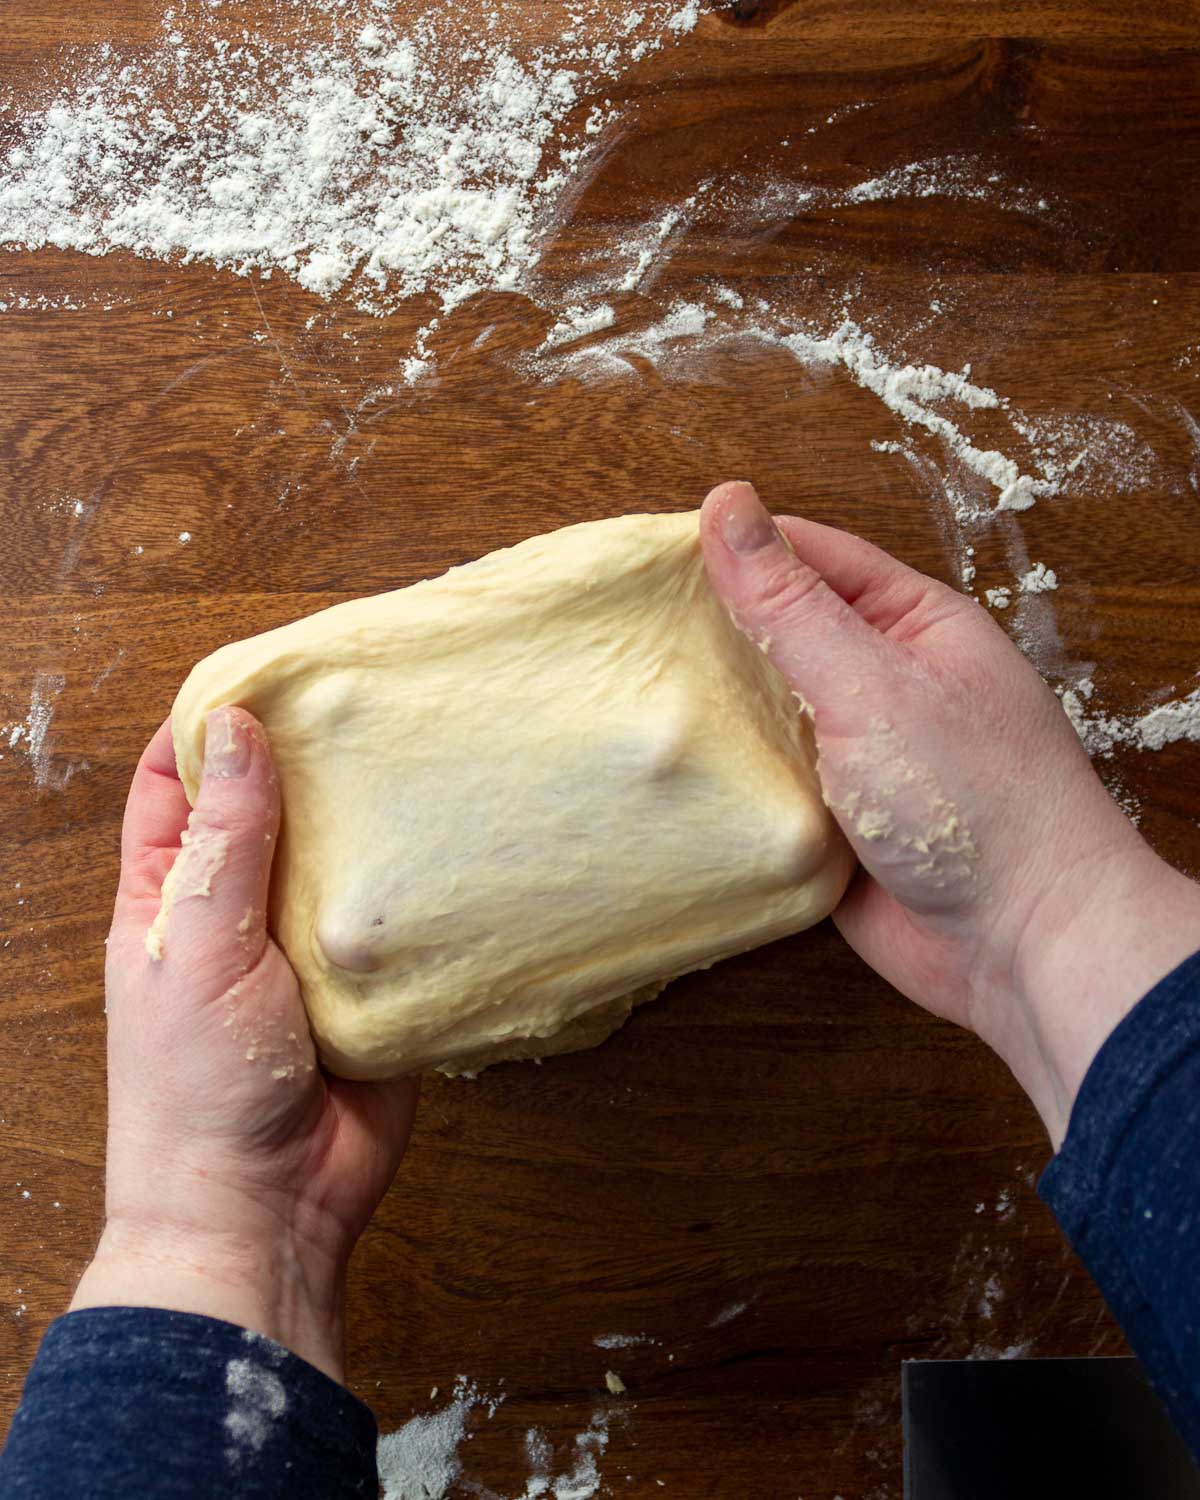 Step 3 - Hand stretching out a piece of dough to show the window pane test.